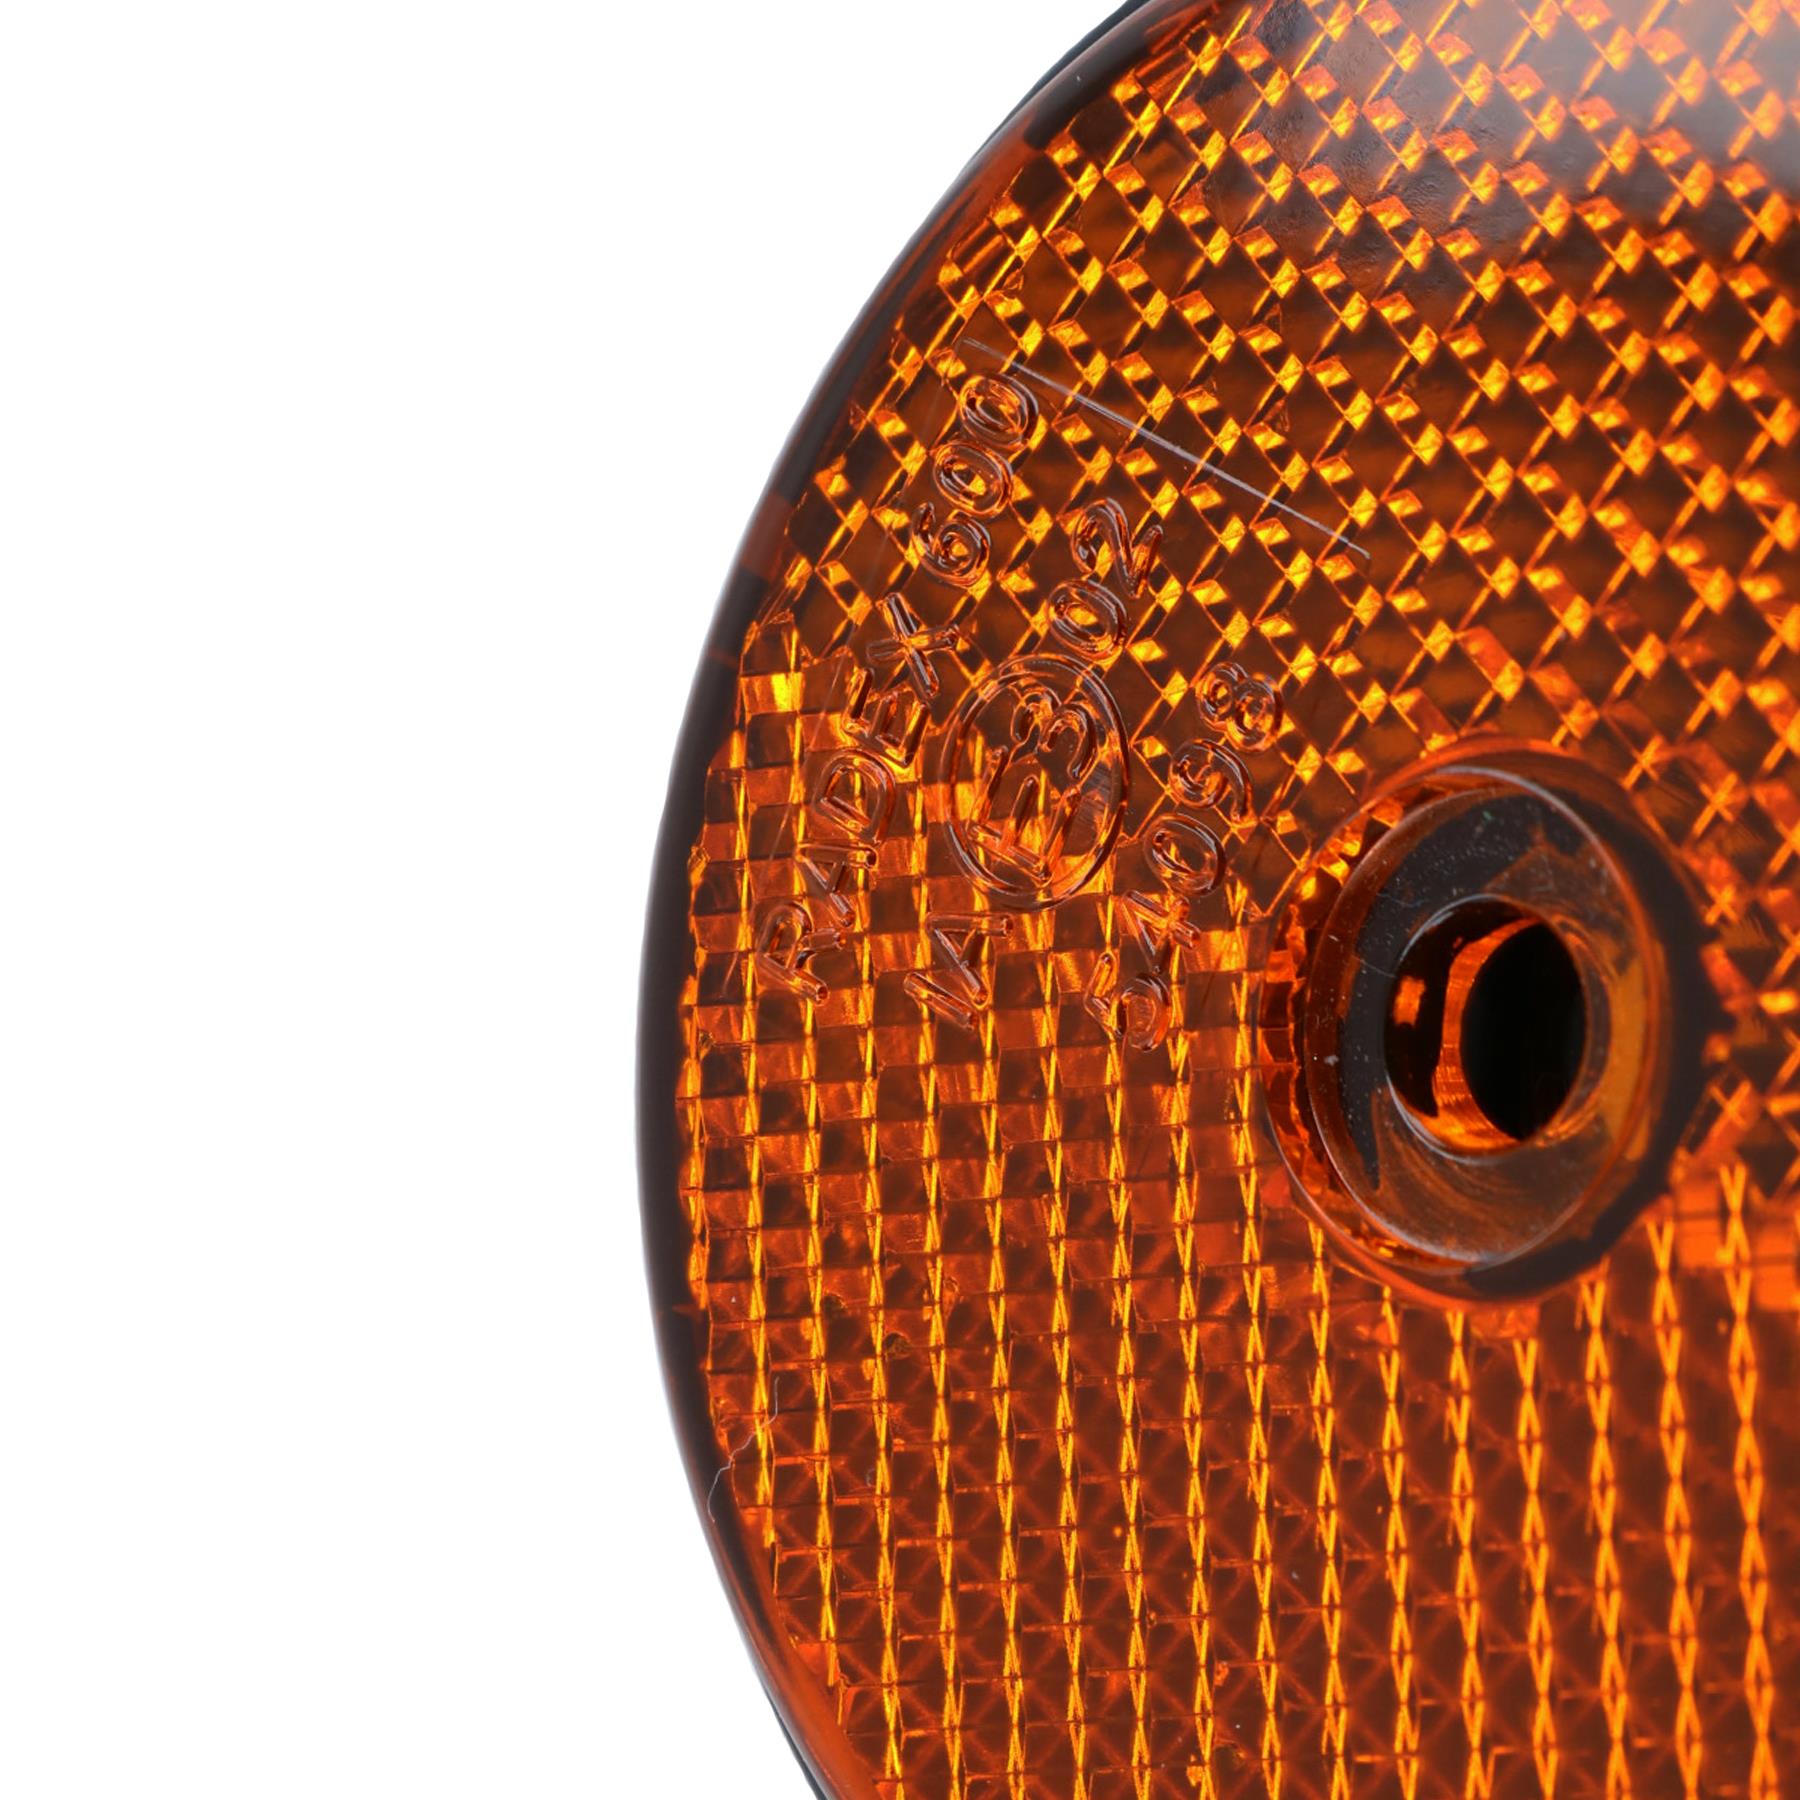 Orange Amber Round Circular Reflectors for Driveway Gate Fence Post Trailers